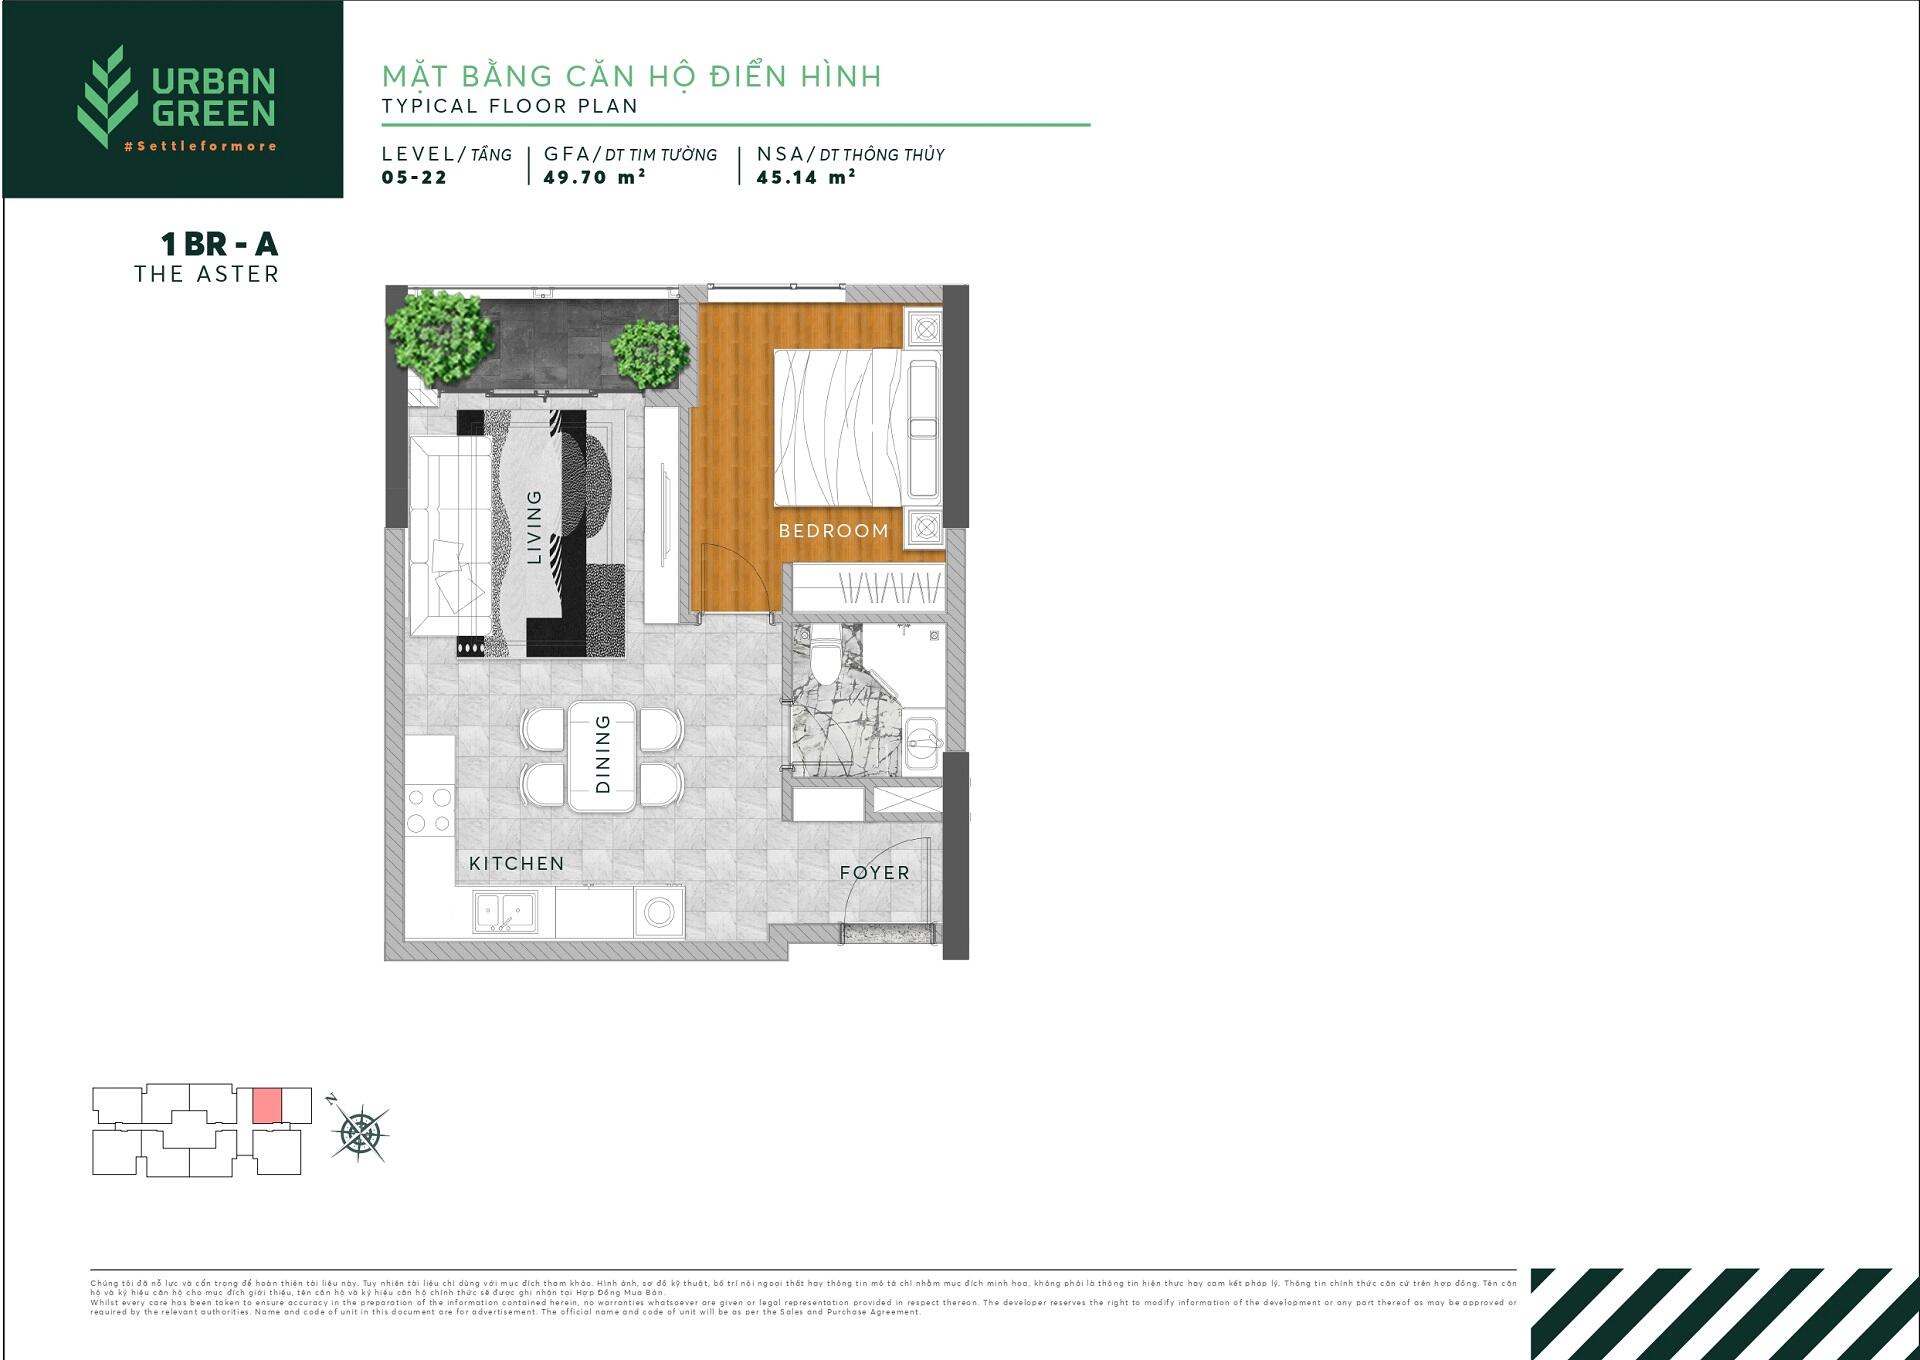 The layout of 1-bedroom apartment 1BR - A